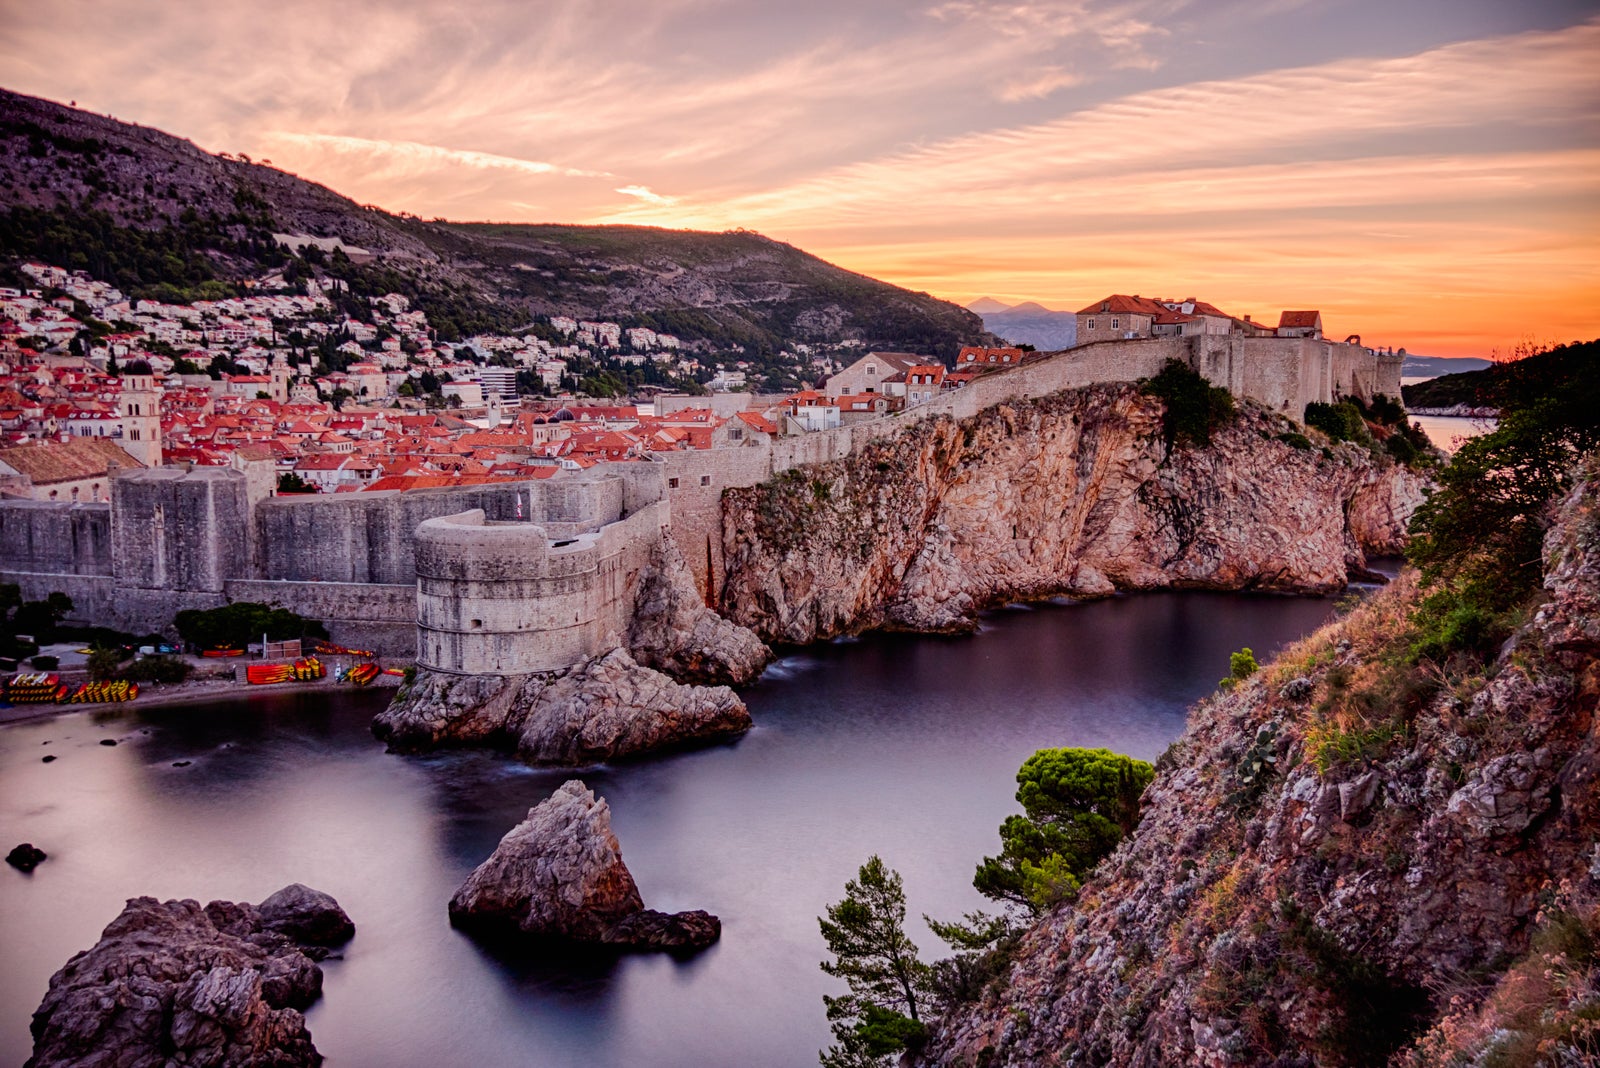 Cityscape of Dubrovnik with city walls